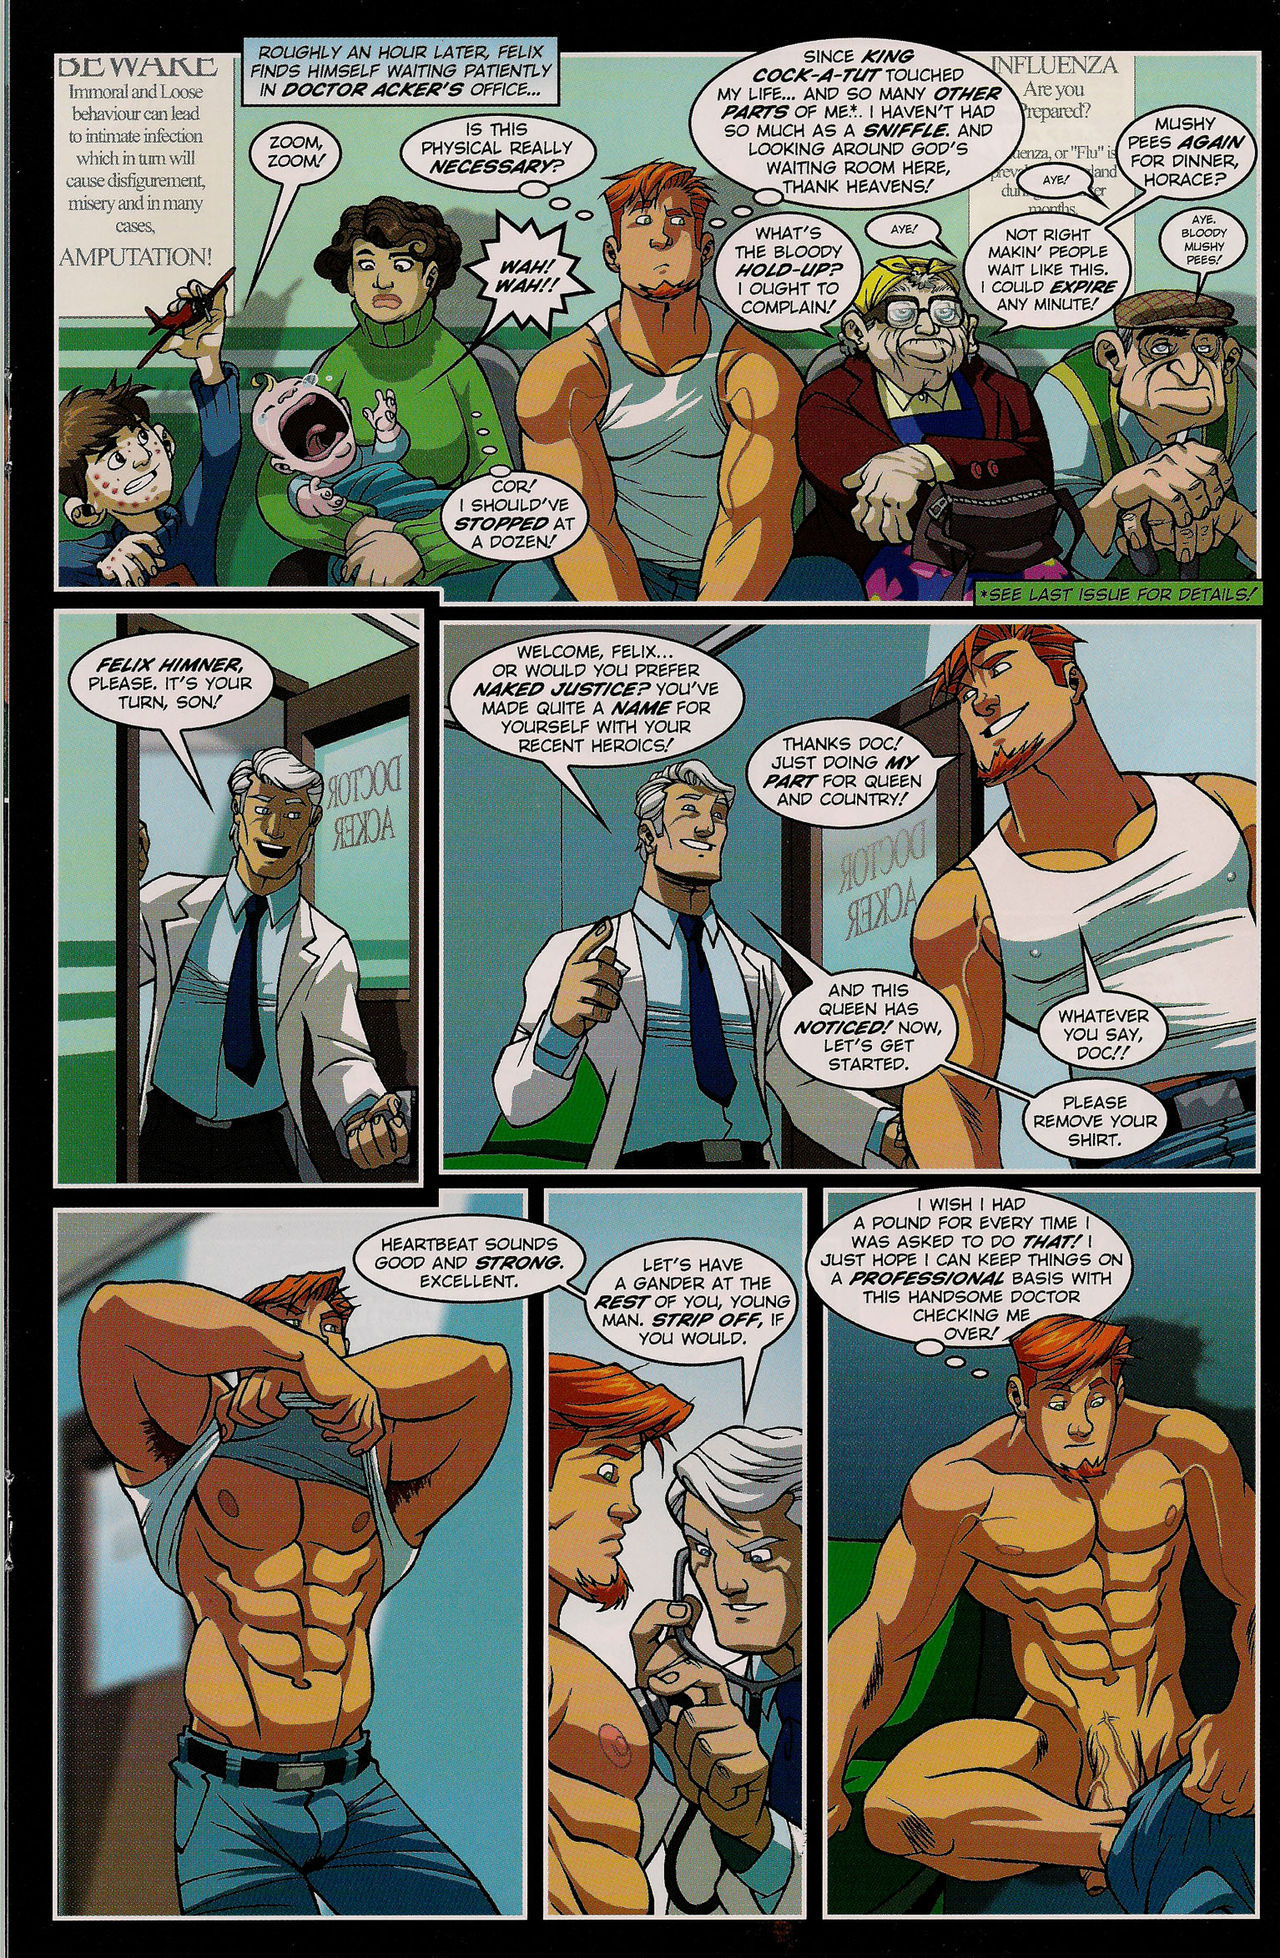 Naked Justice Beginnings 2 (Patrick Fillion) page 13